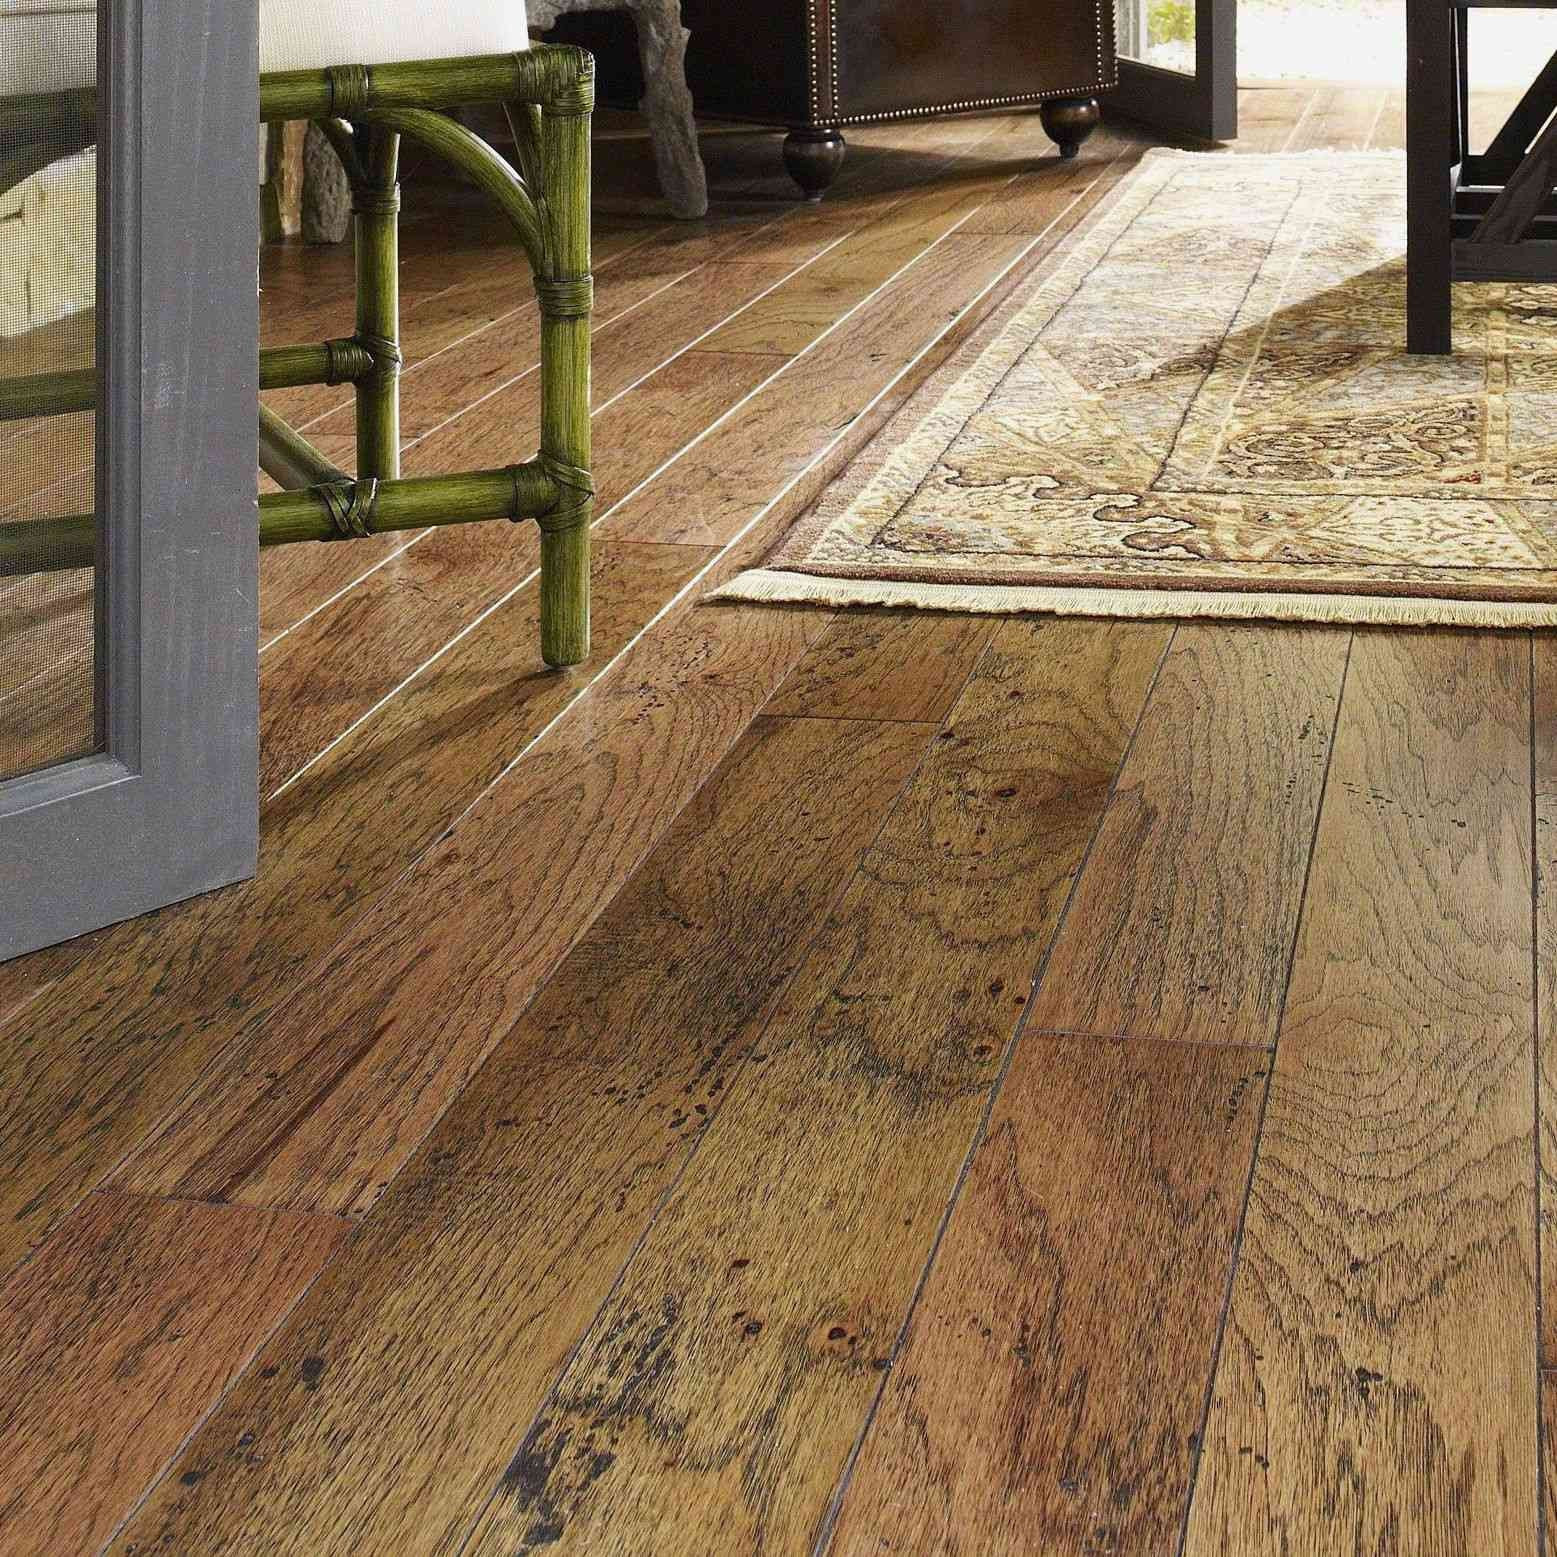 26 Popular Hardwood Flooring On Sale Near Me 2024 free download hardwood flooring on sale near me of best place to buy area rugs cheap fresh area rugs for hardwood pertaining to best place to buy area rugs cheap fresh 35 new best buy area rugs of best